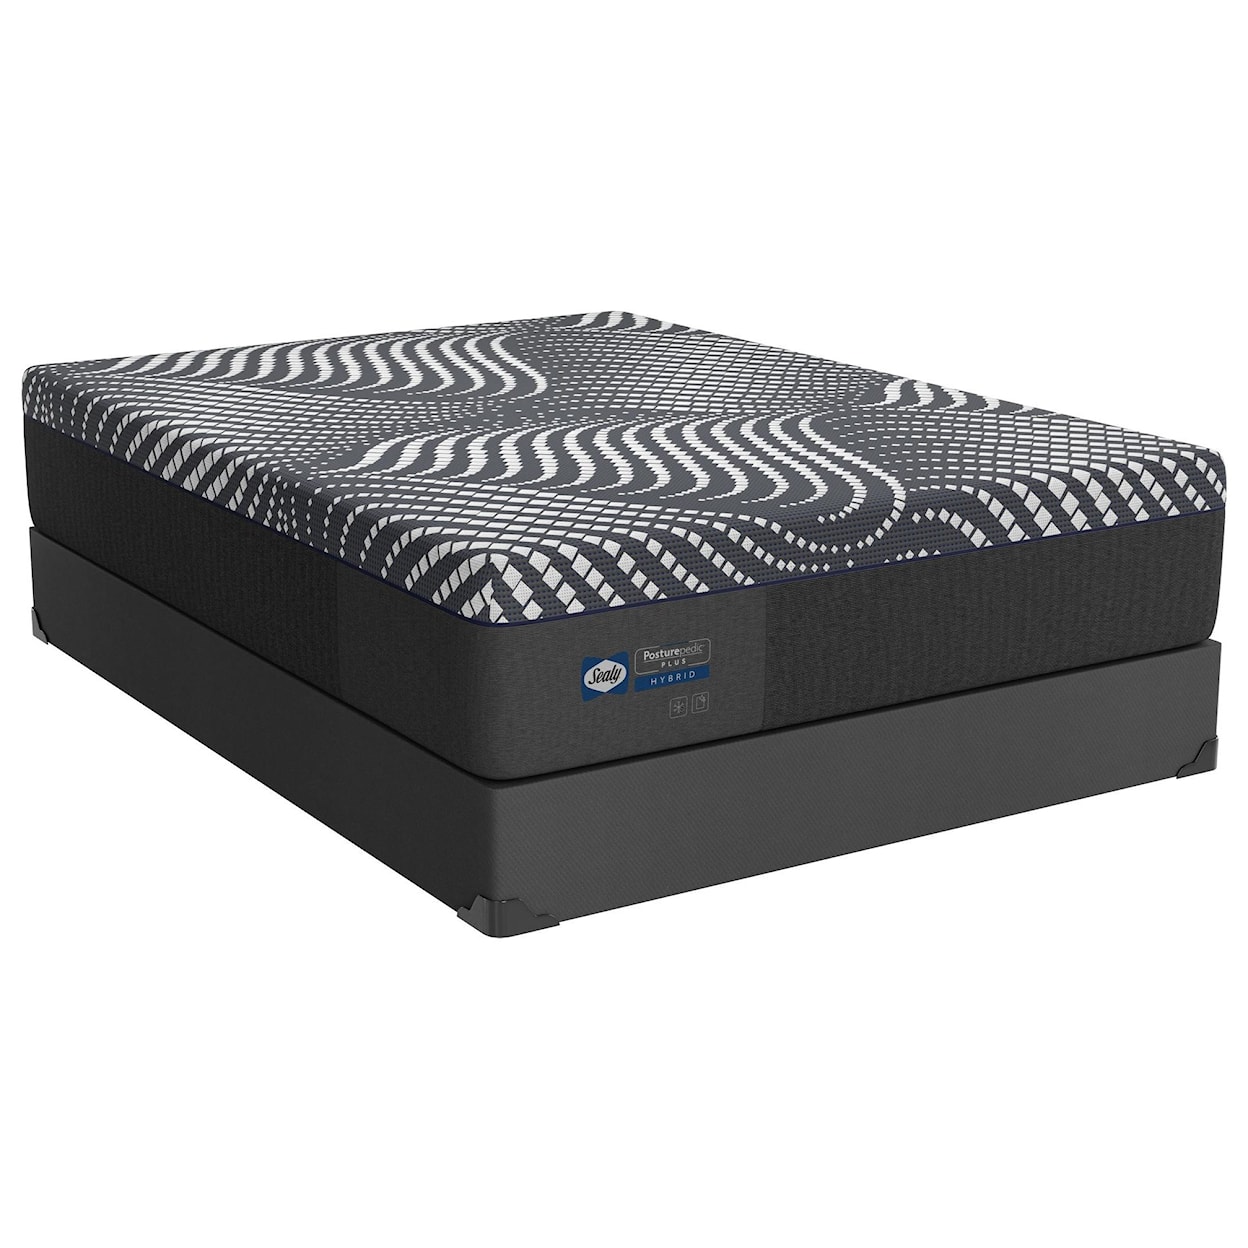 Sealy Sealy Hybrid King High Point Firm Mattress+Standard Bas